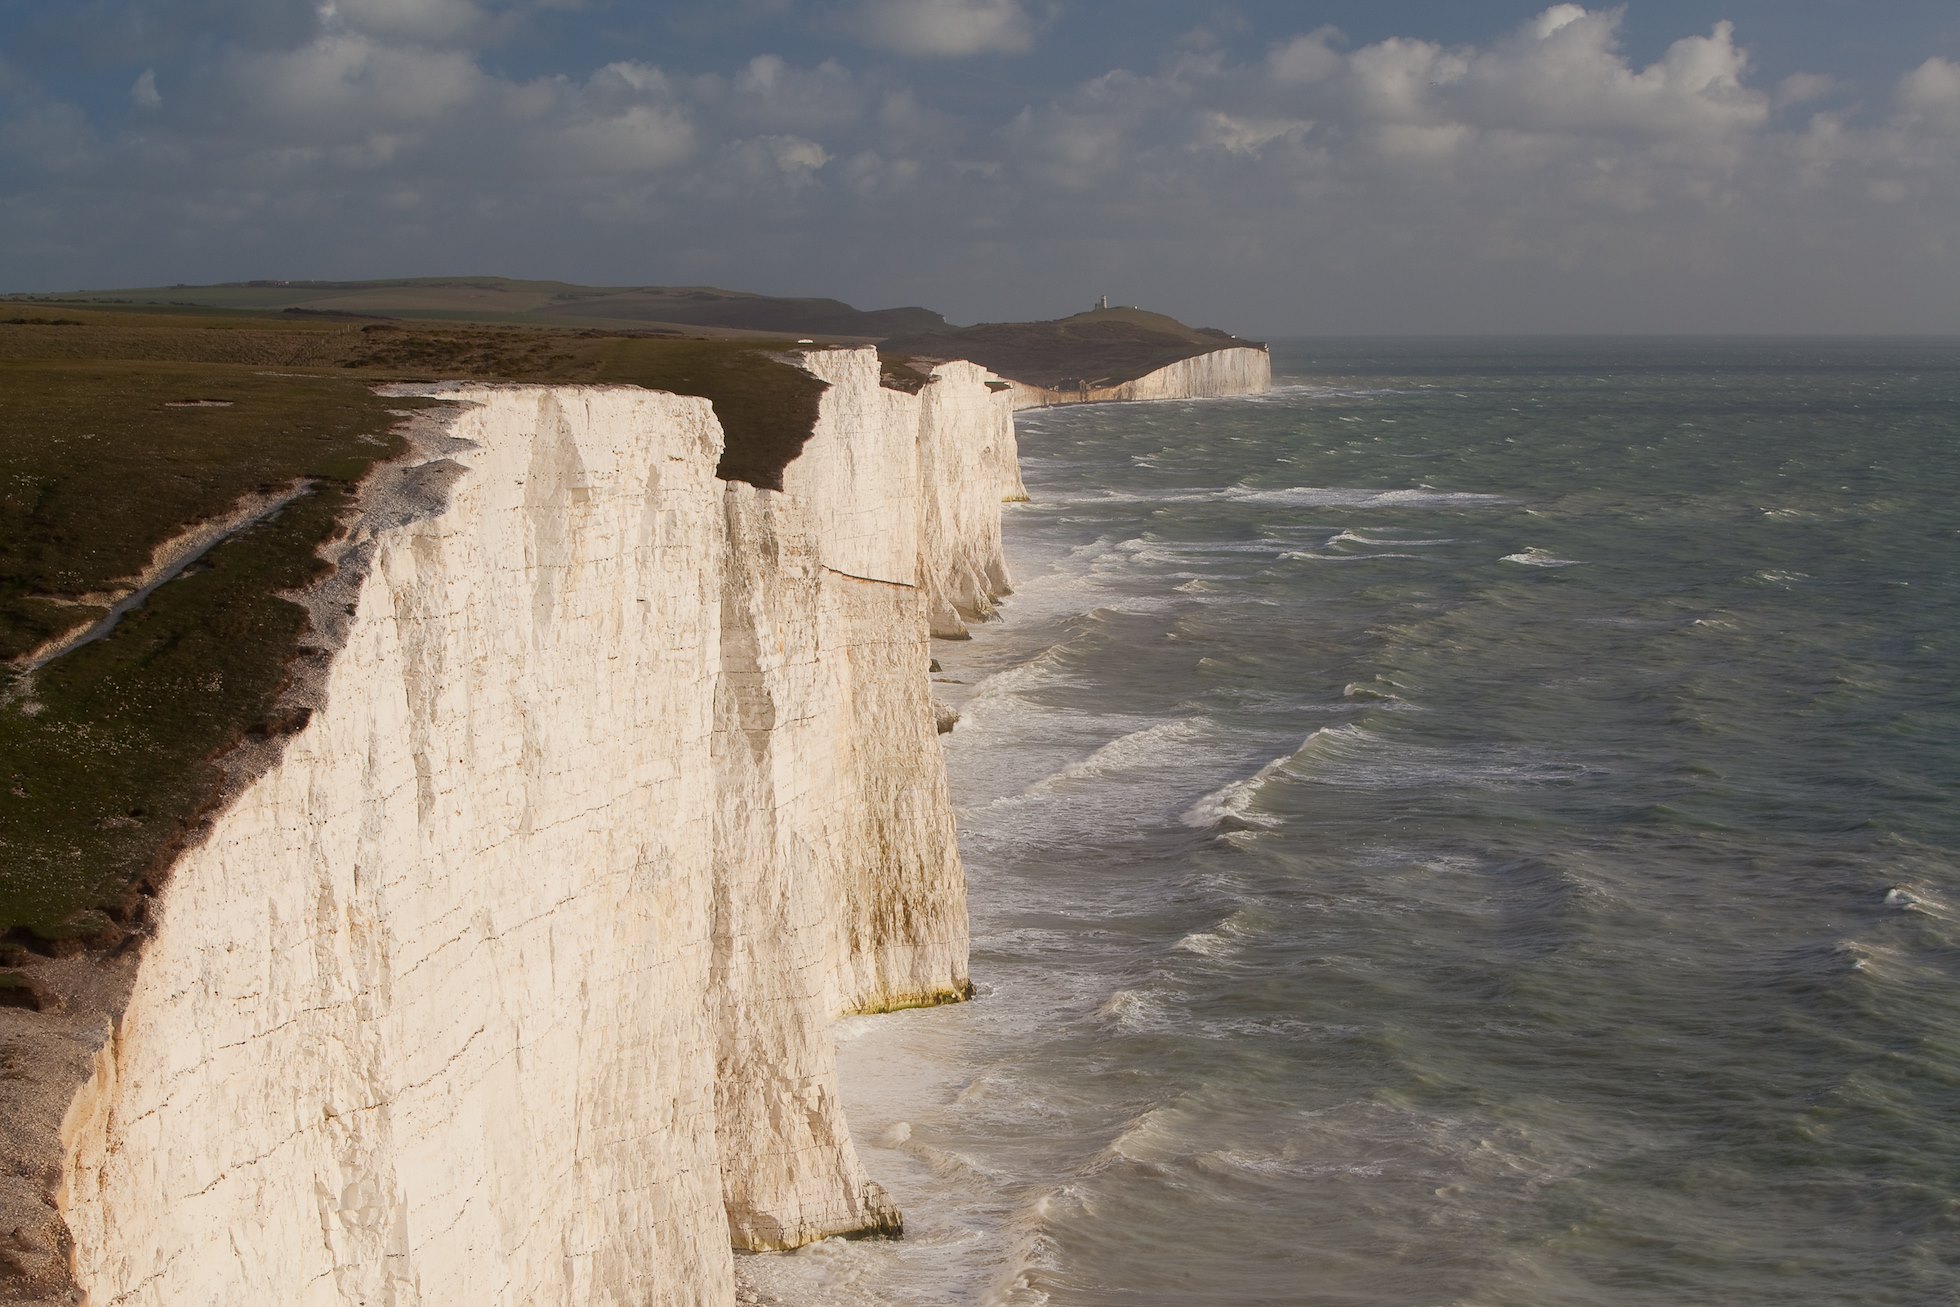 Seven Sisters chalk cliffs, South Downs, England.